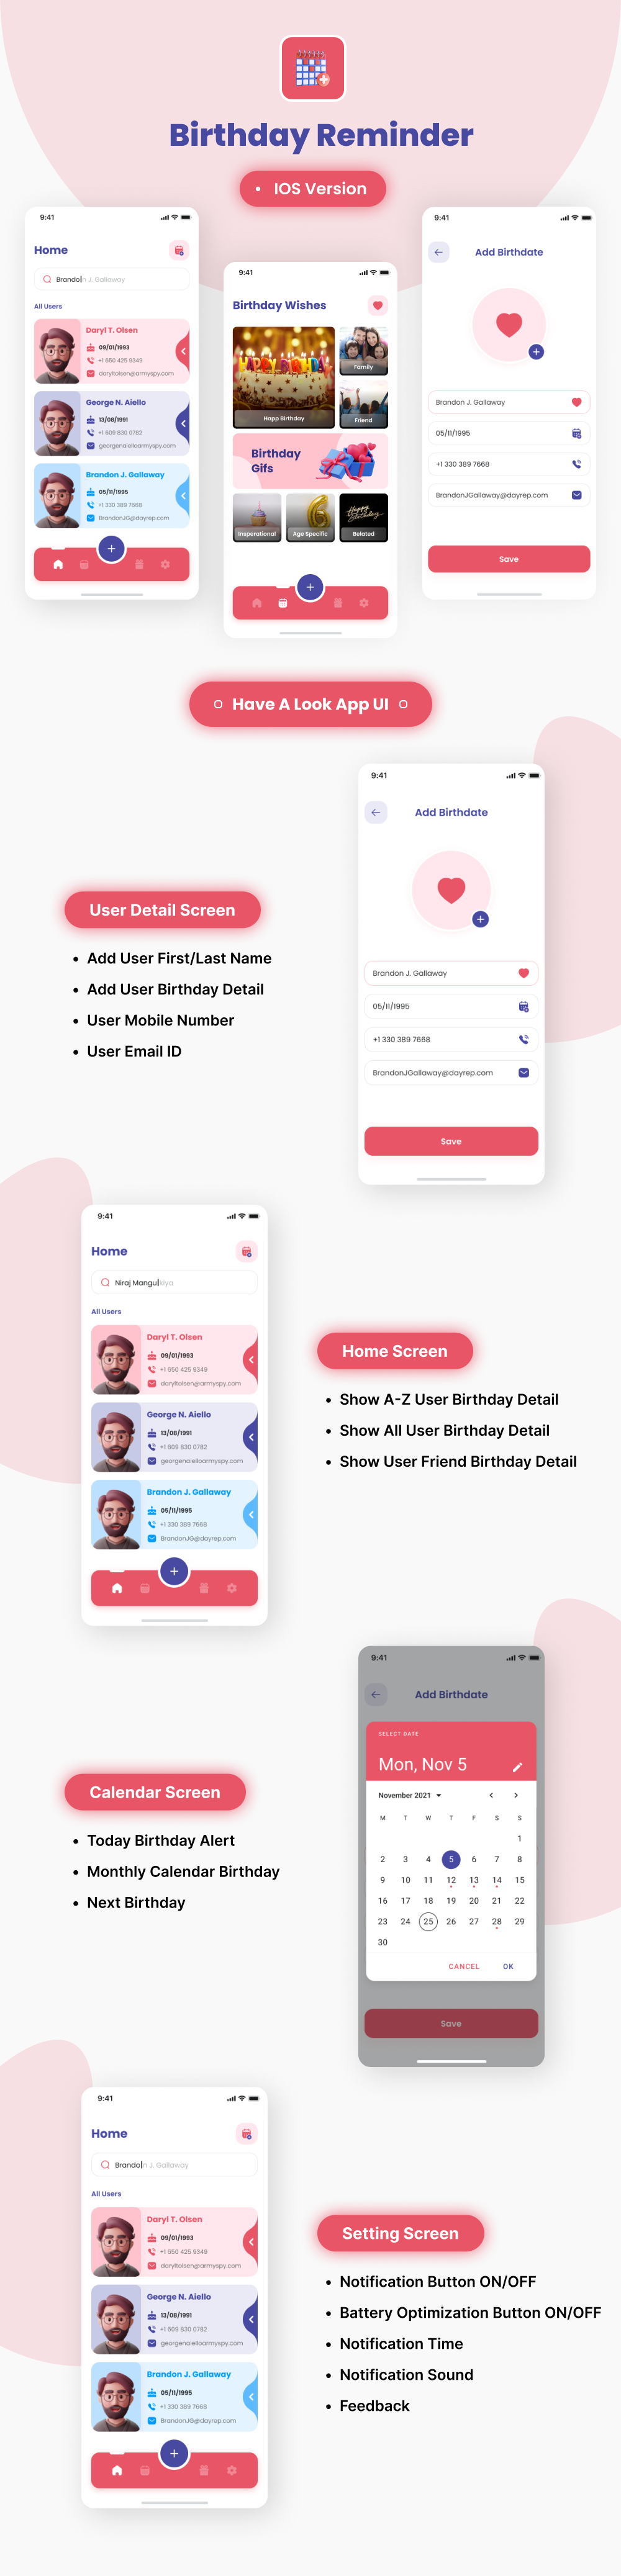 Birthday Reminder App - Android - 1